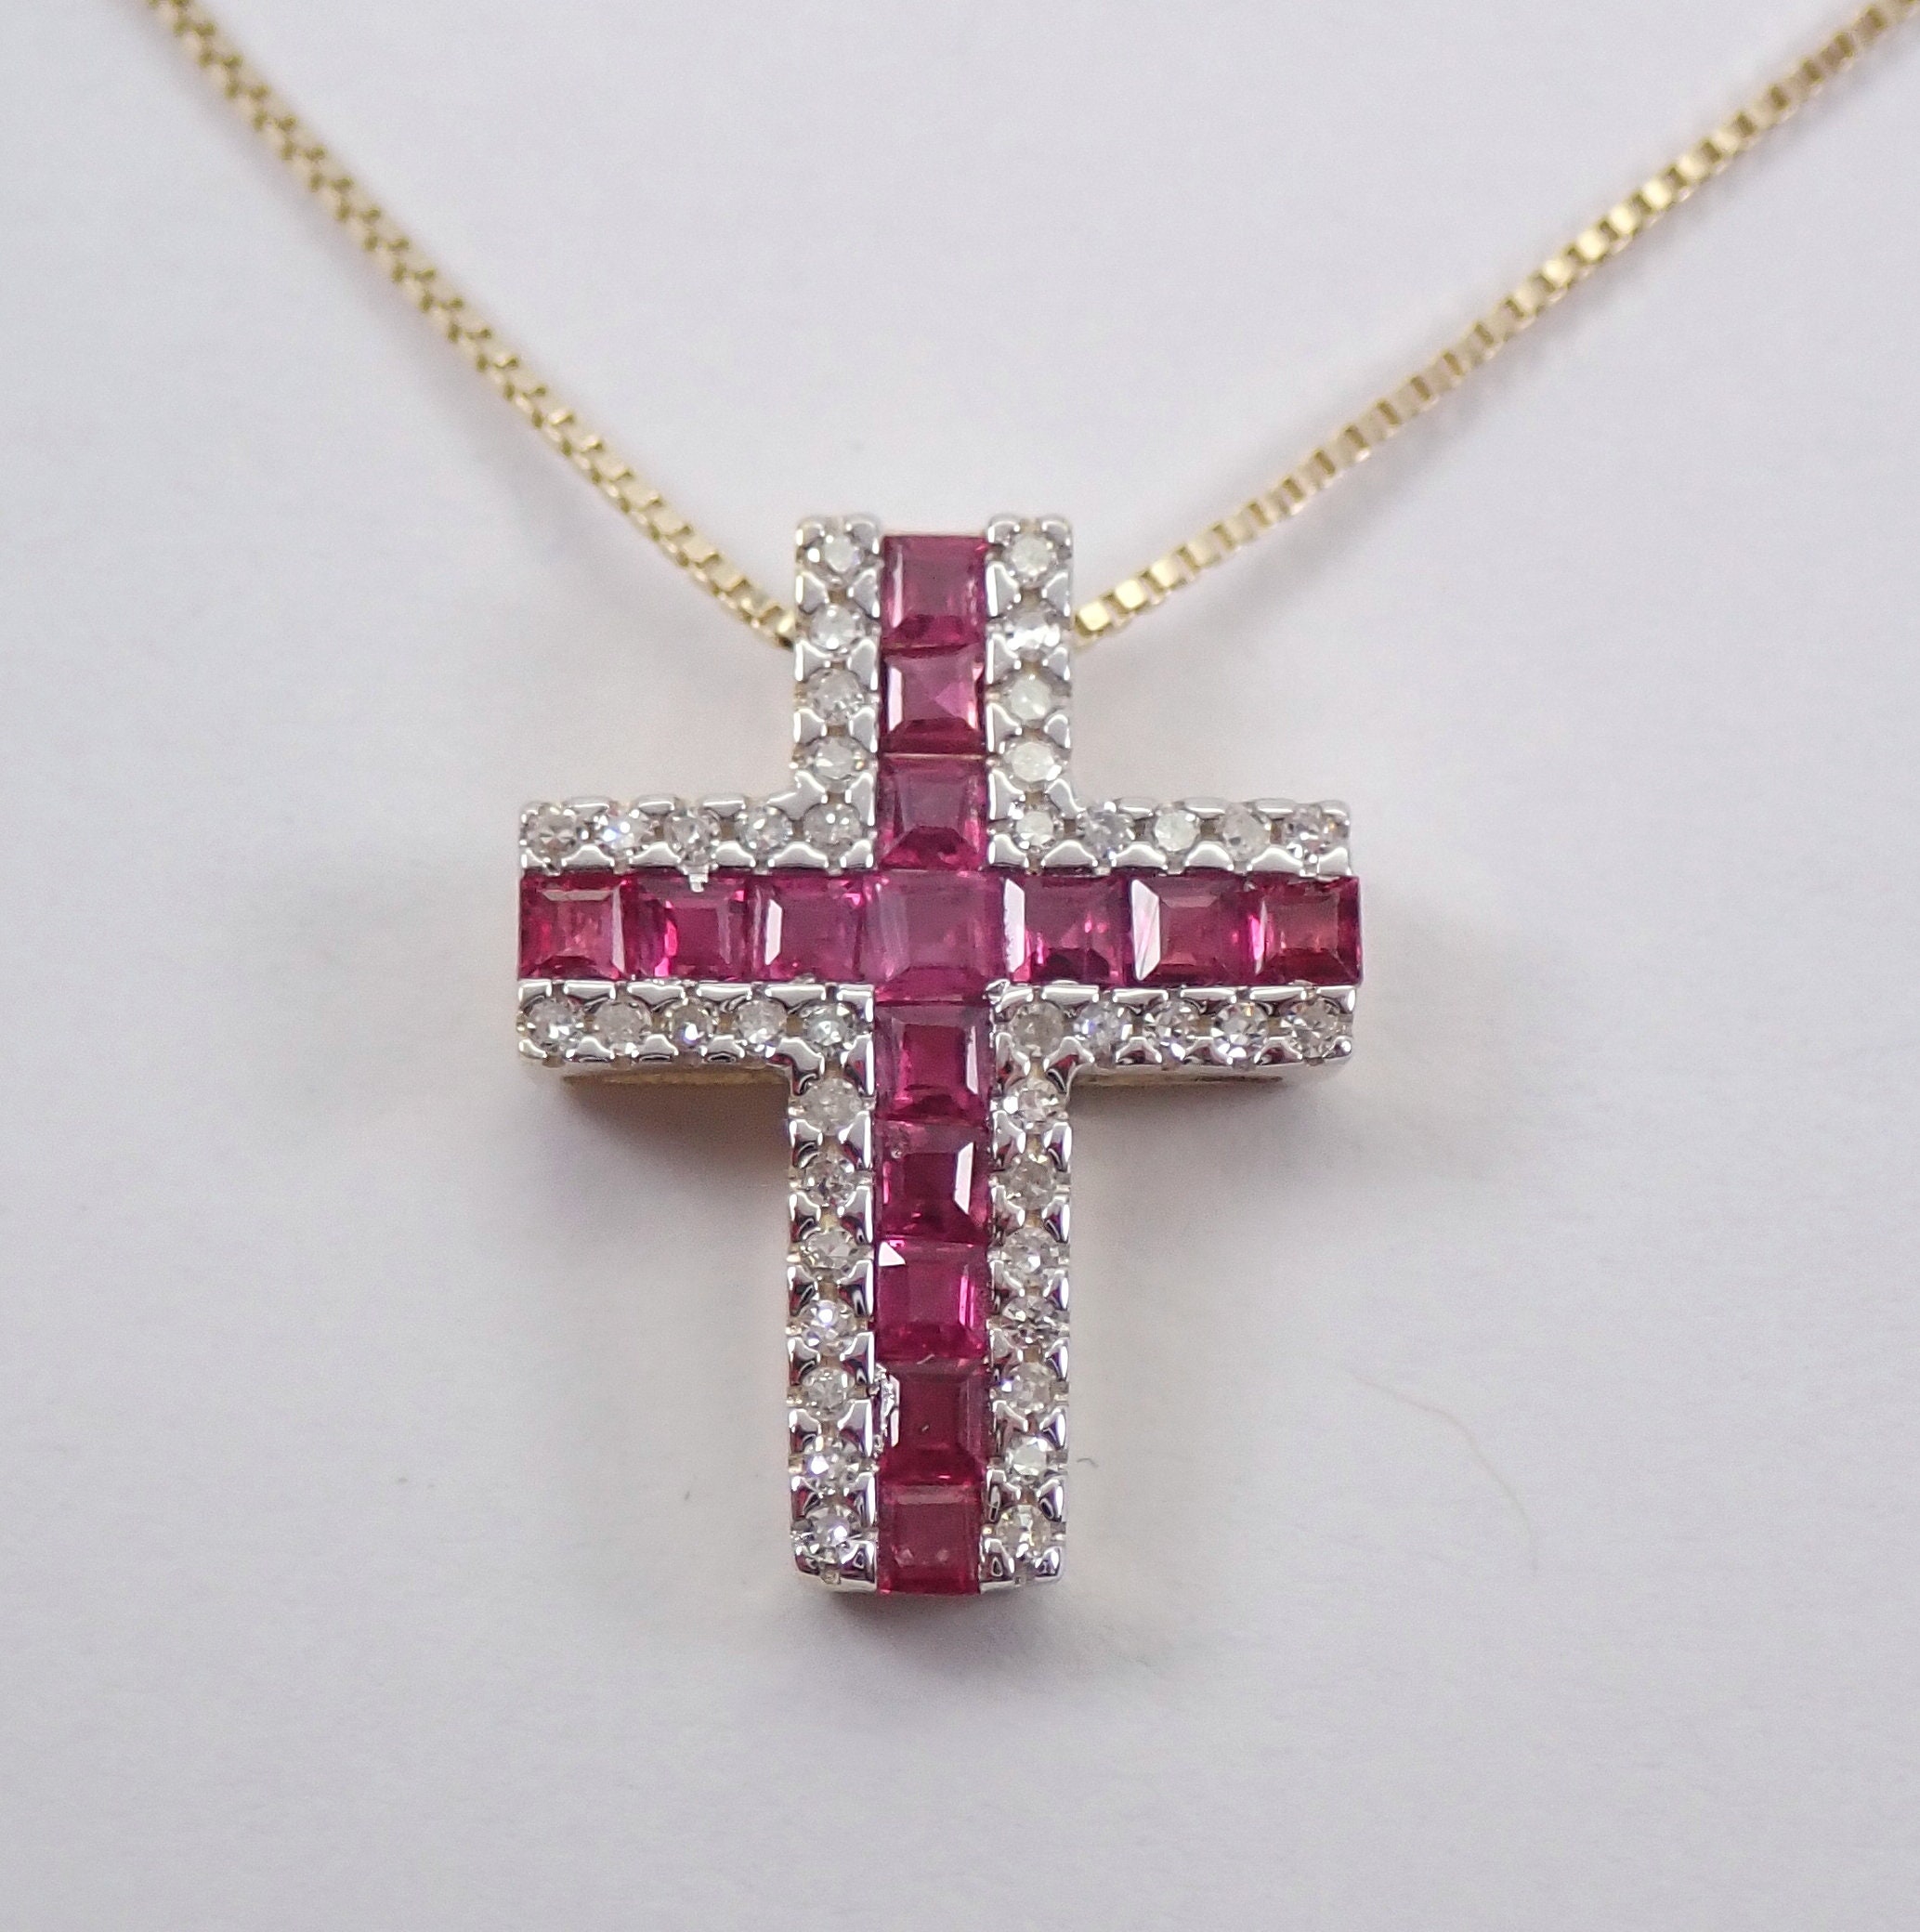 Diamond and Ruby Cross Pendant Necklace 18 Chain 14K Yellow Gold Religious Charm